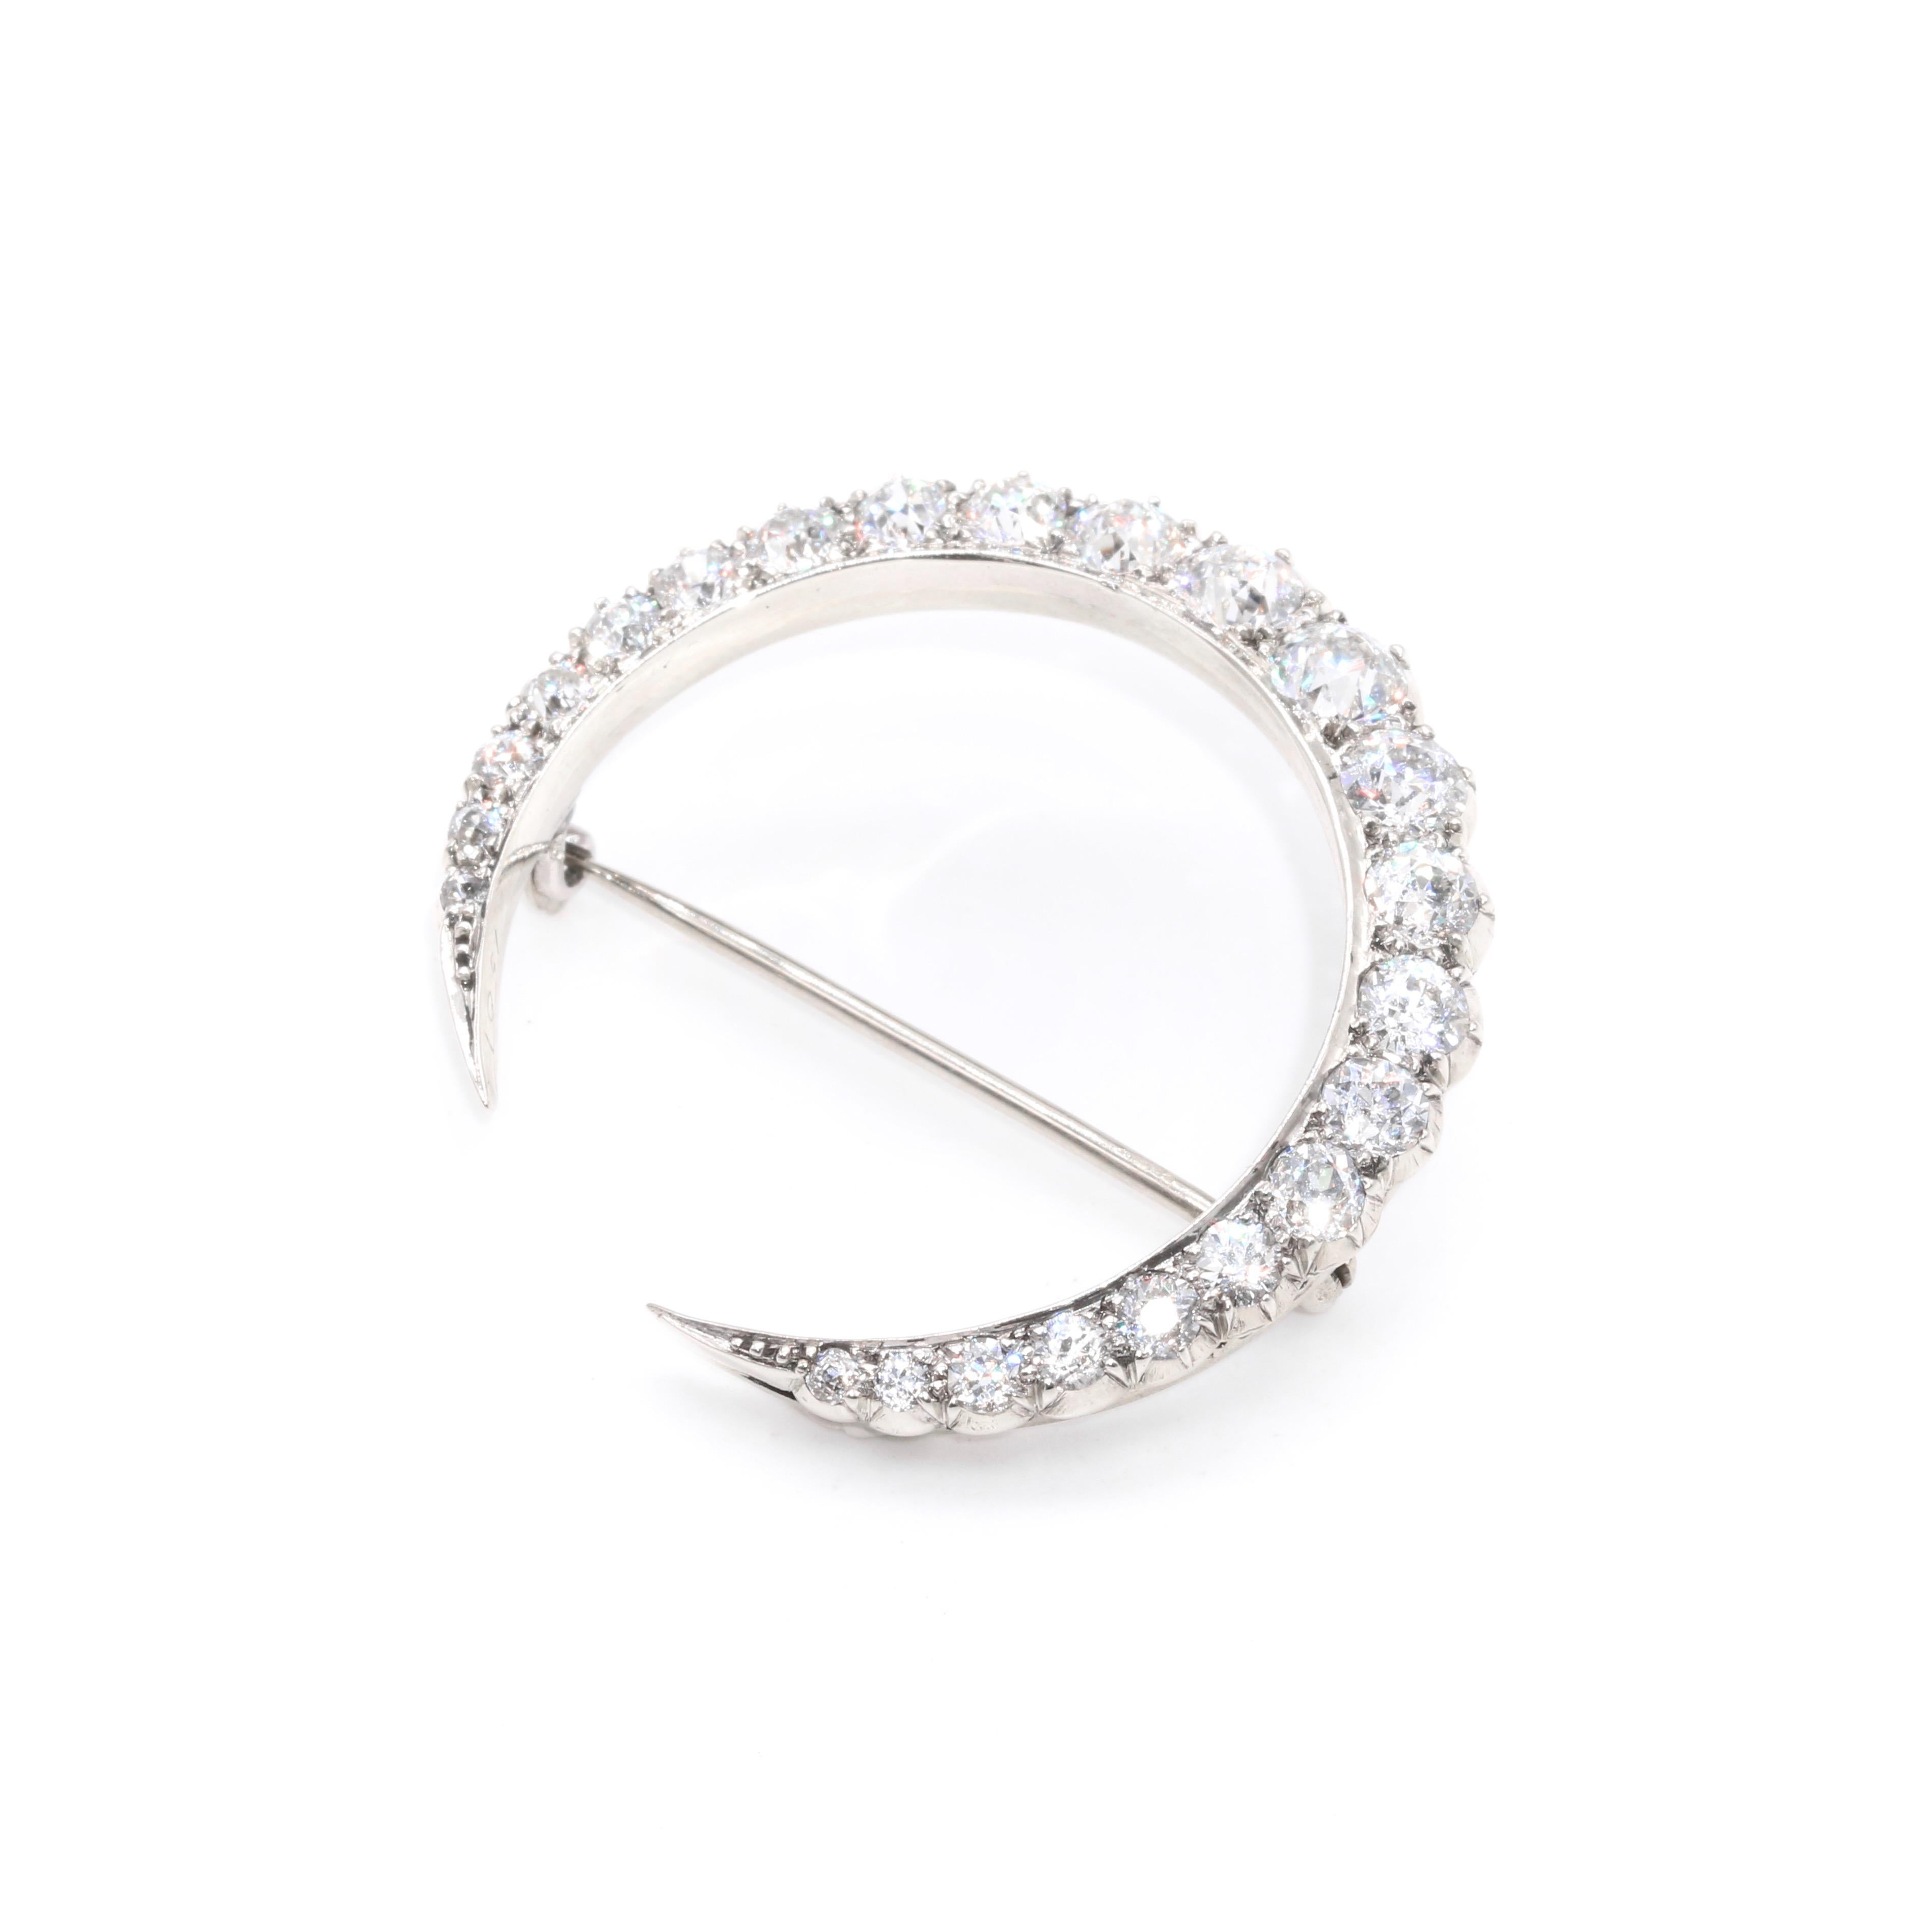 Antique Victorian Silver 4.93ctw Old Cut Diamond Crescent Moon Brooch For Sale 2